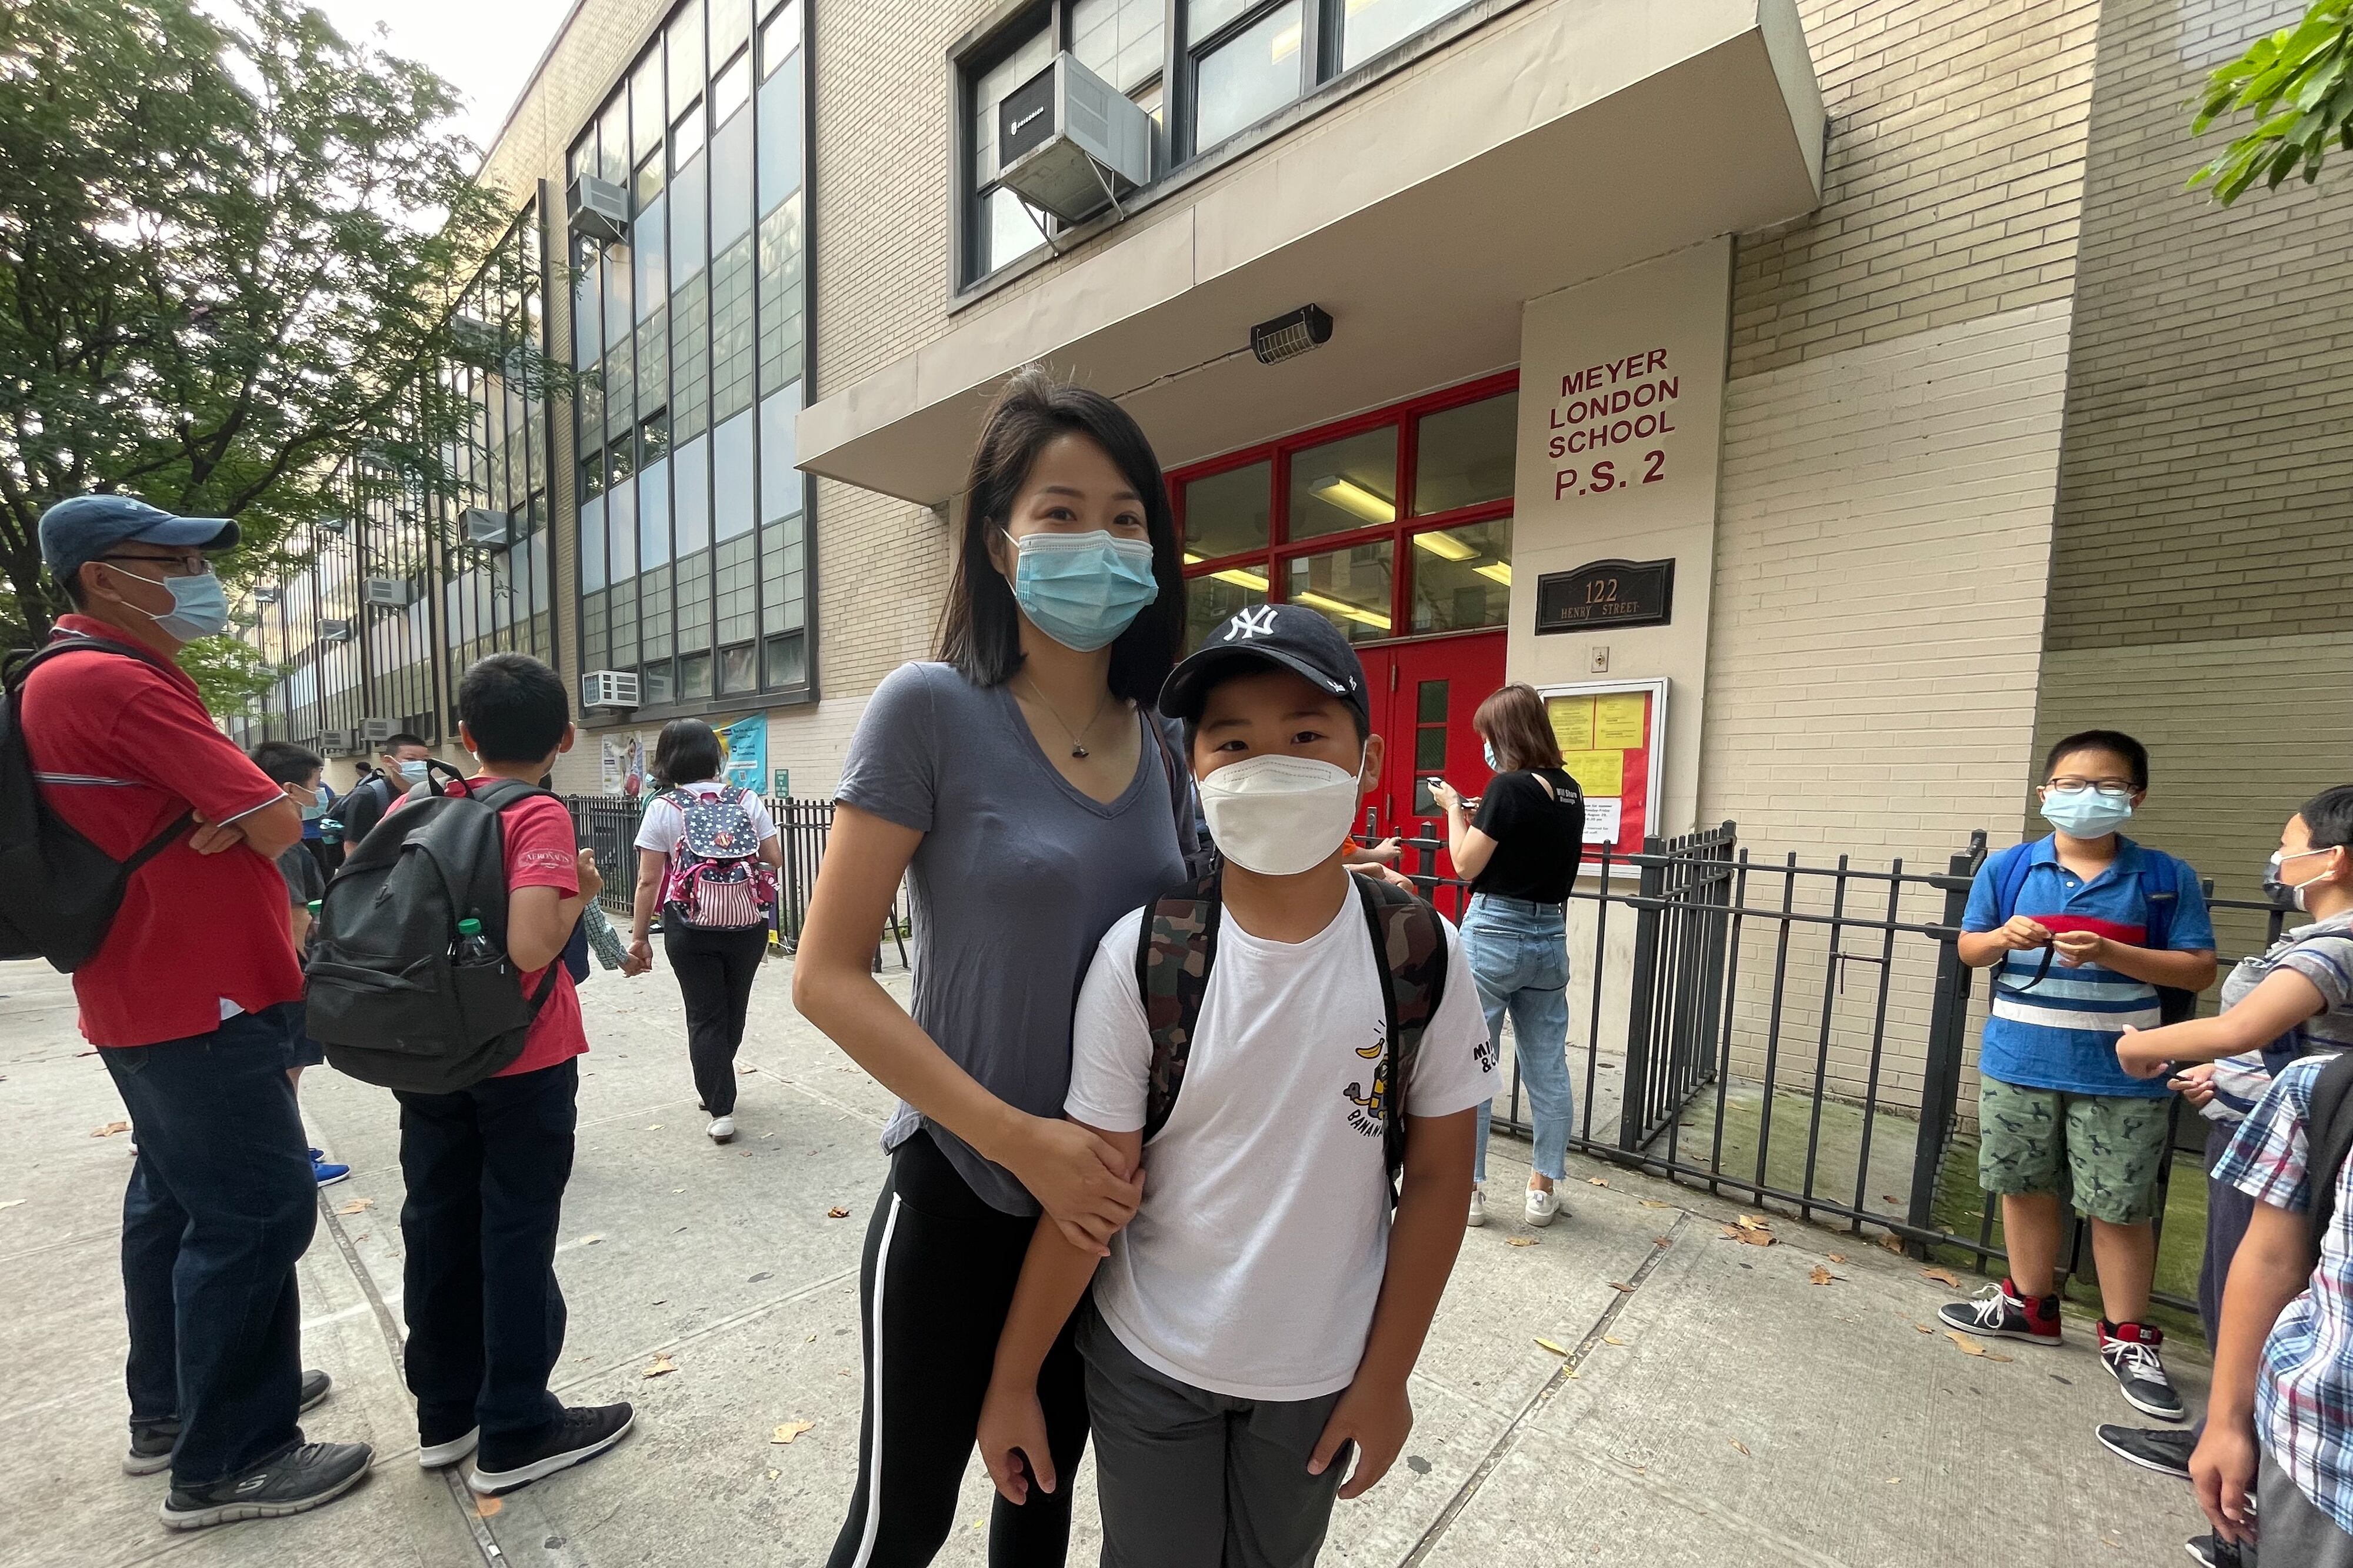 A woman and her son stand in front of a school building among other parents and children for a summer program, all wearing protective masks.